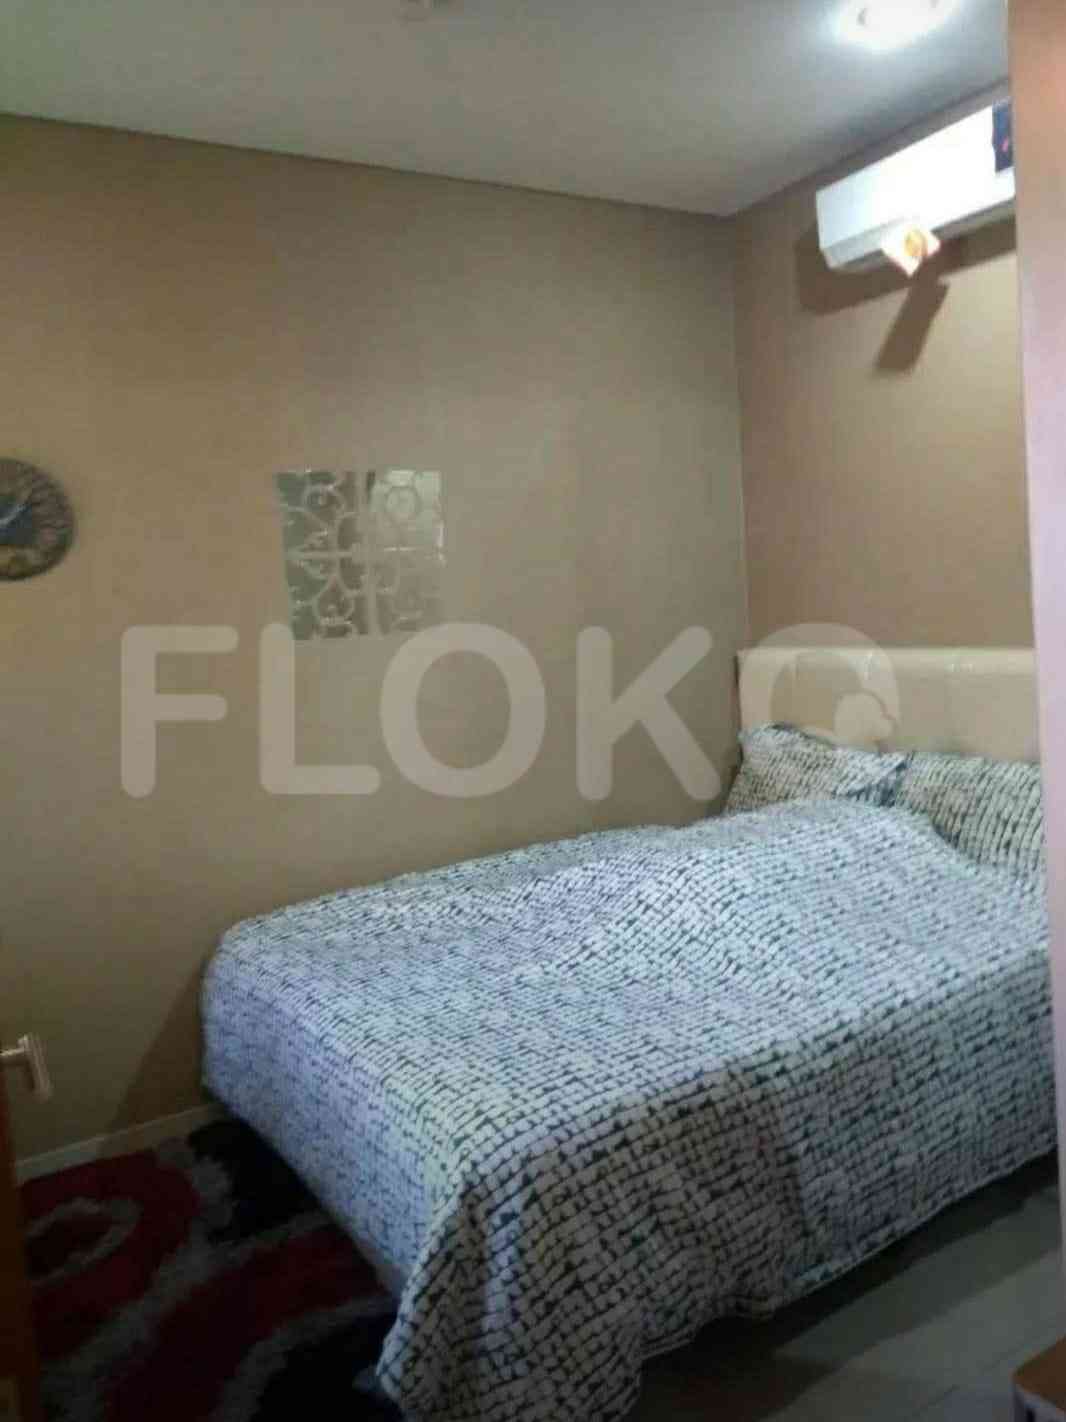 2 Bedroom on 15th Floor for Rent in Kuningan Place Apartment - fku817 1